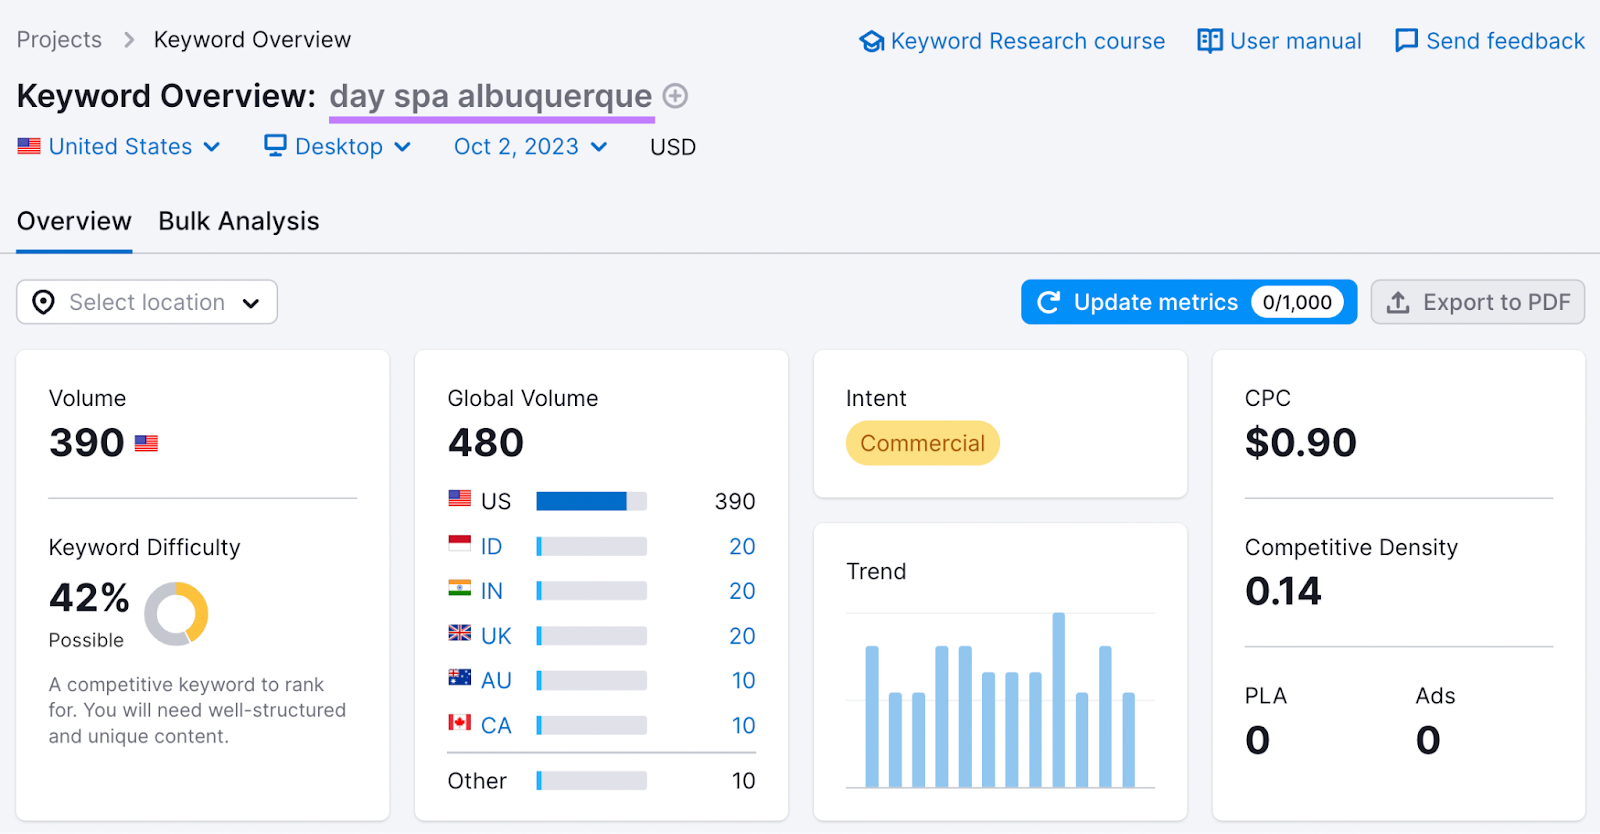 "day spa albuquerque" keyword overview in Keyword Overview tool